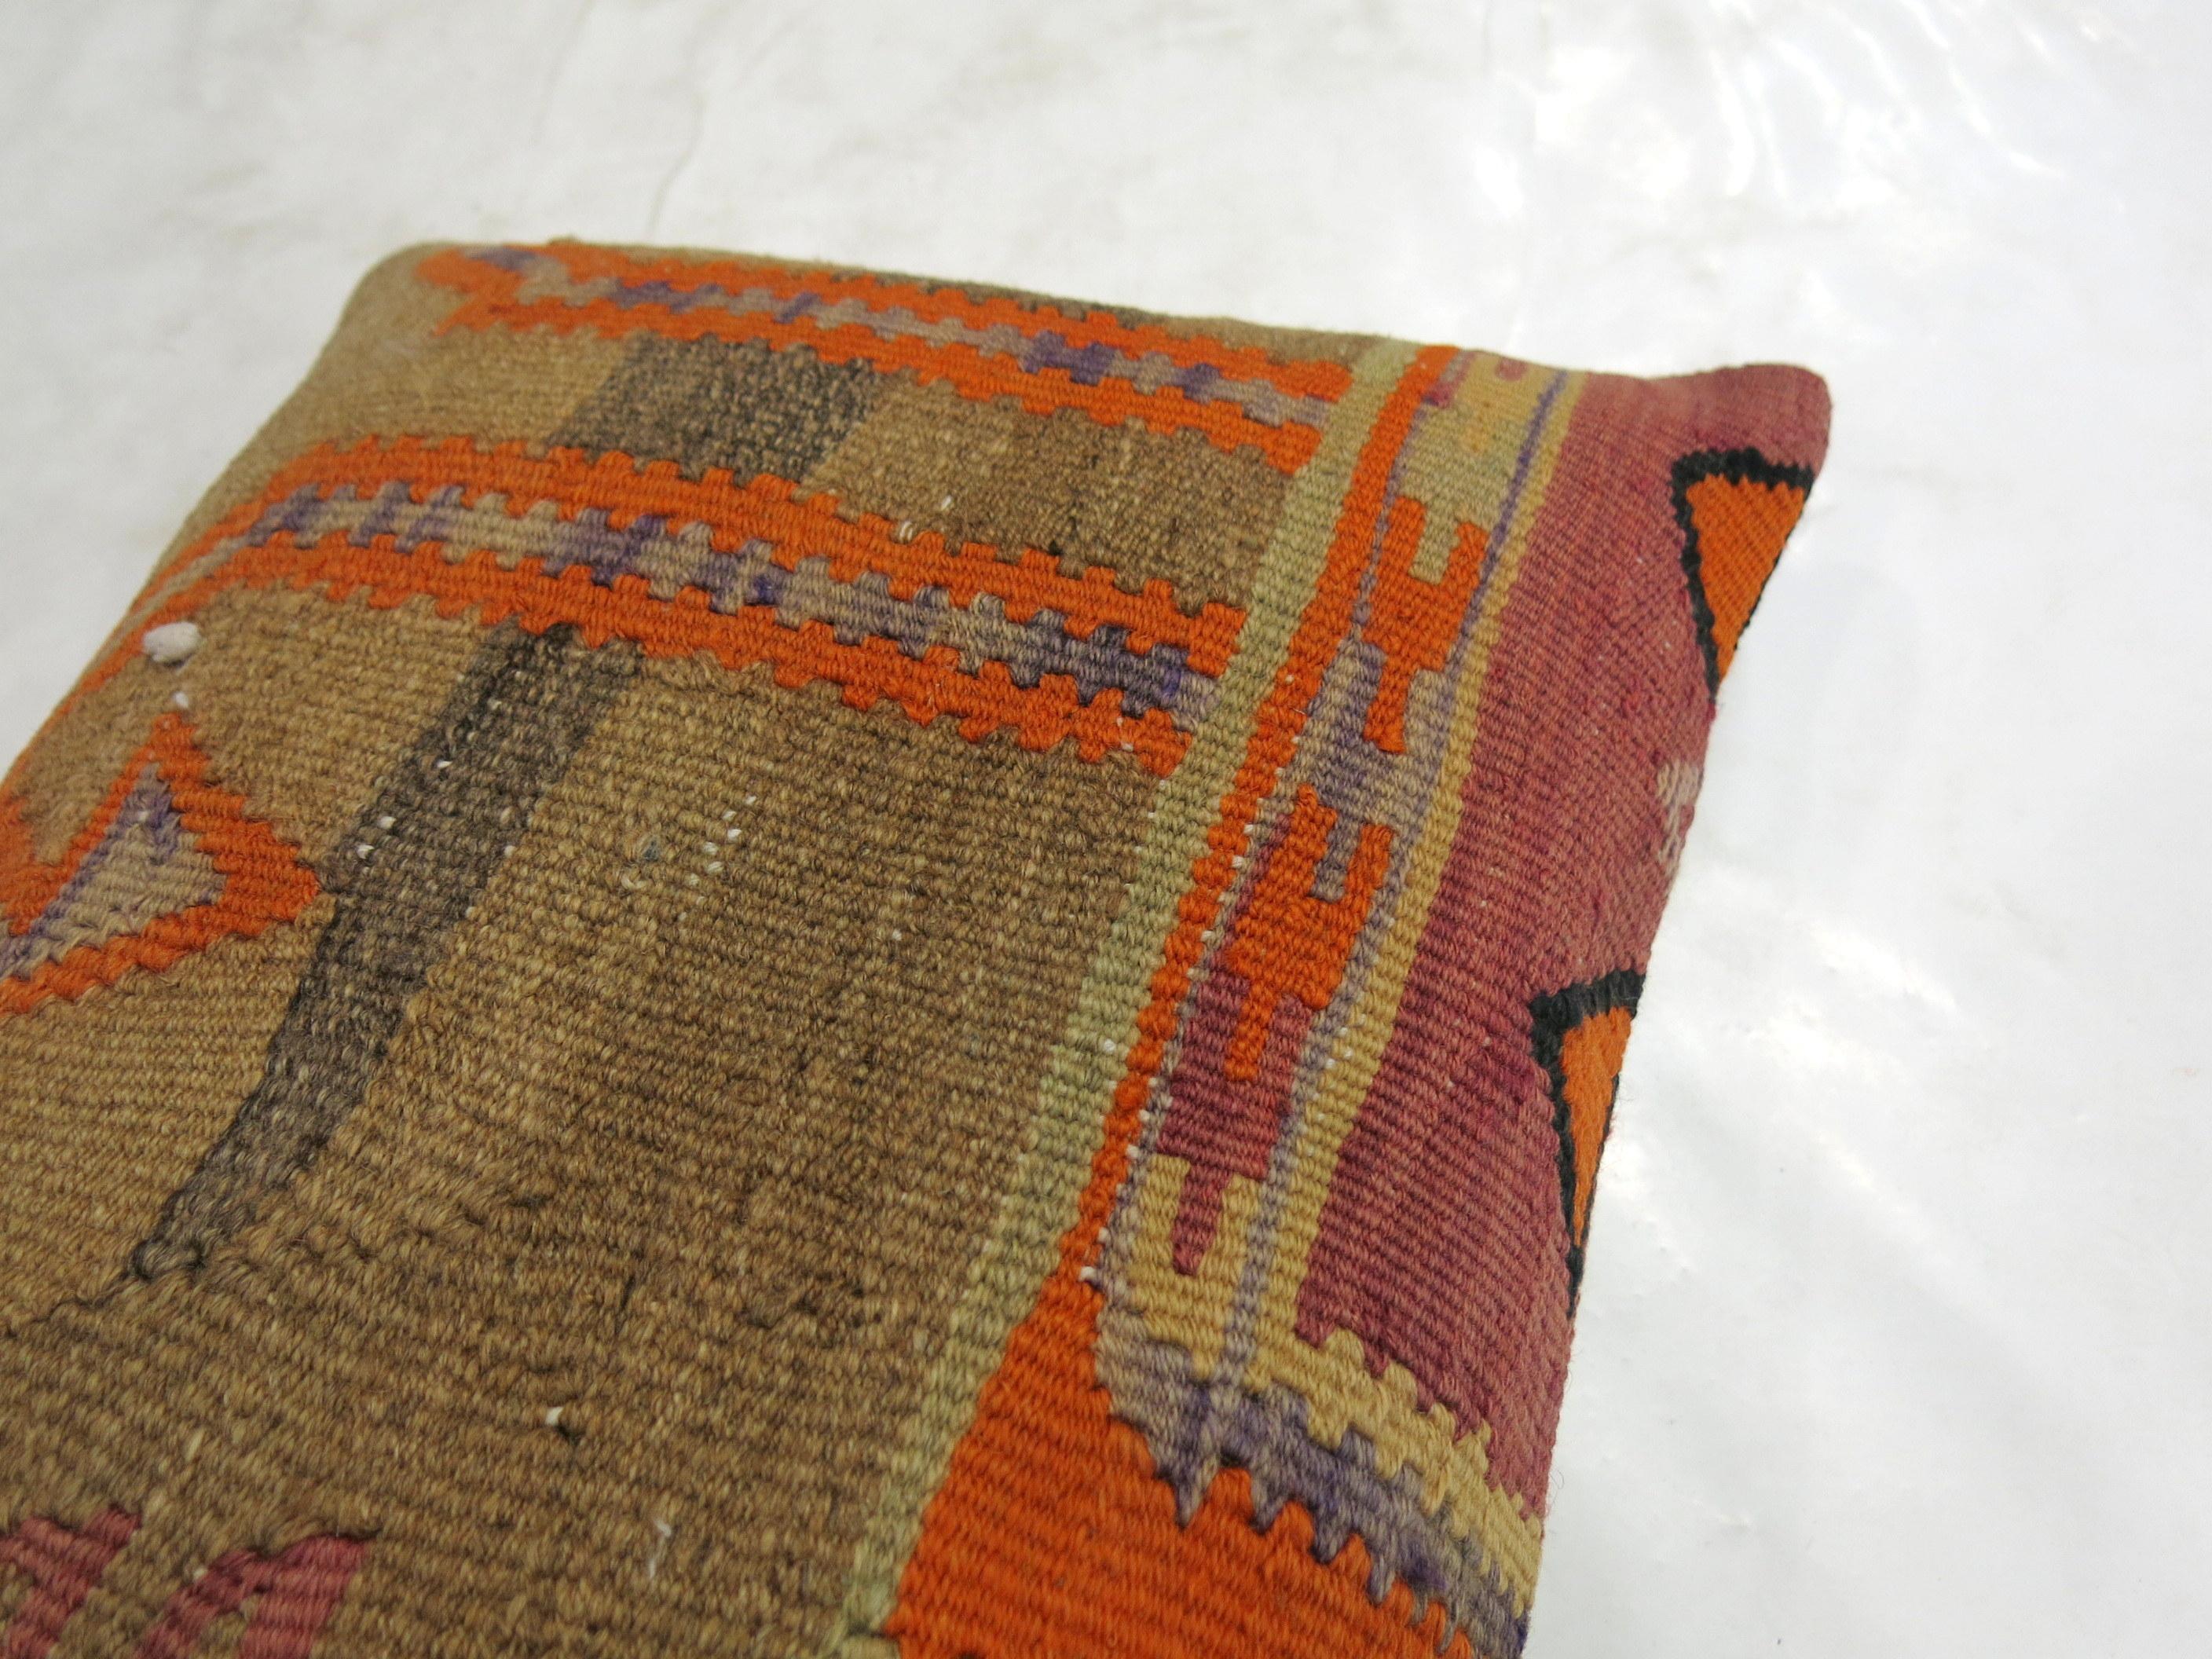 Pillow made from an antique Turkish Kilim flat-weave.